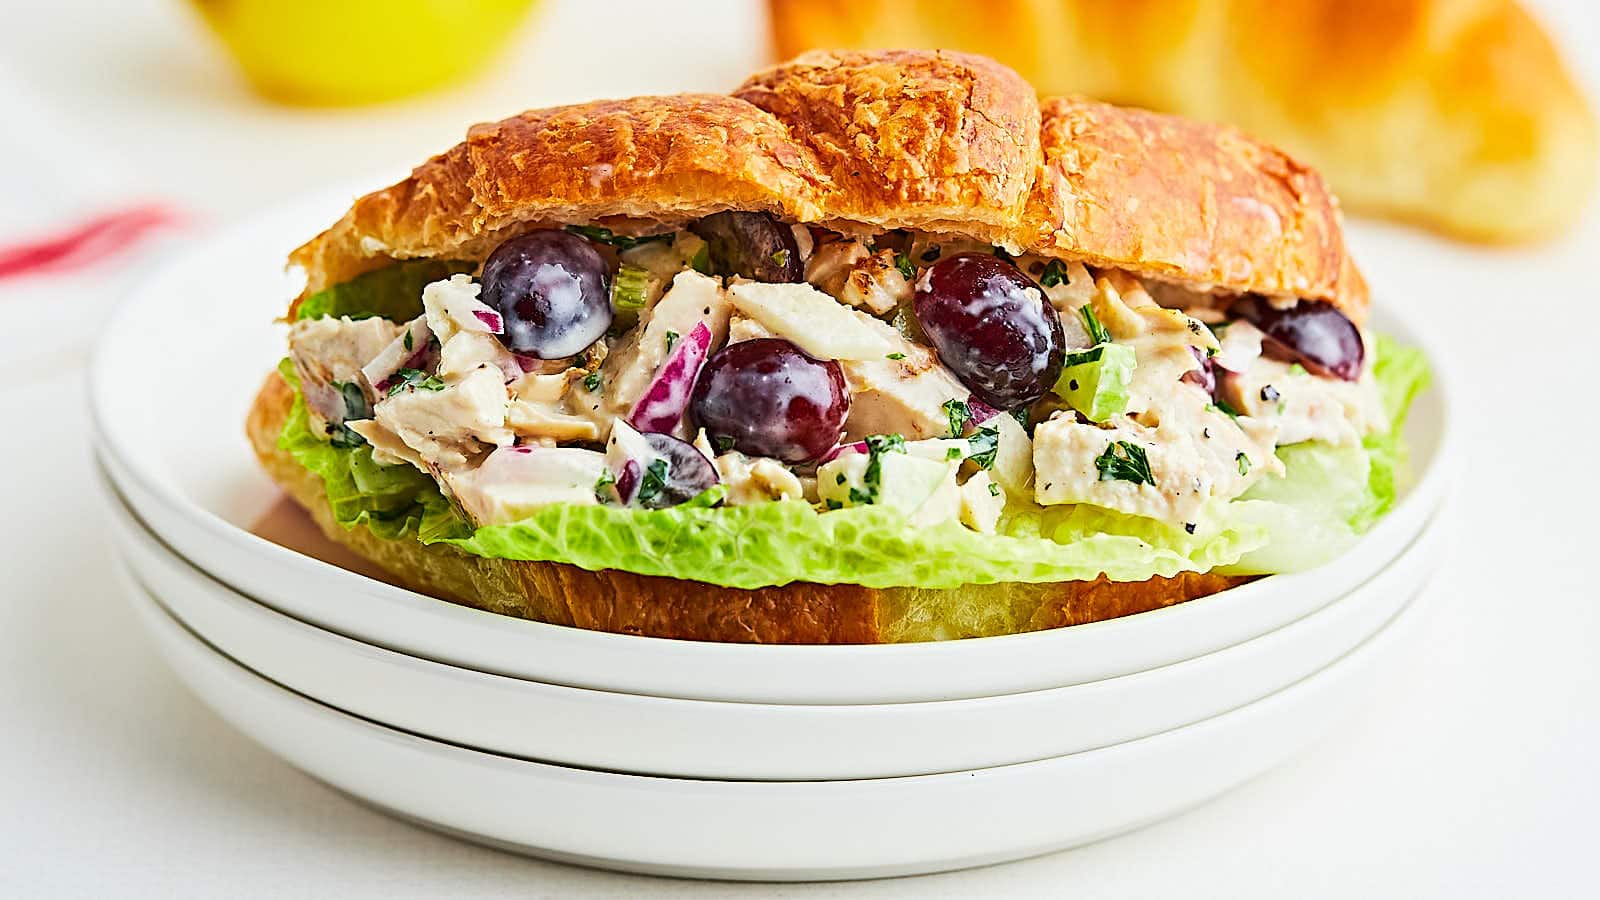 Chicken Salad recipe by Cheerful Cook.